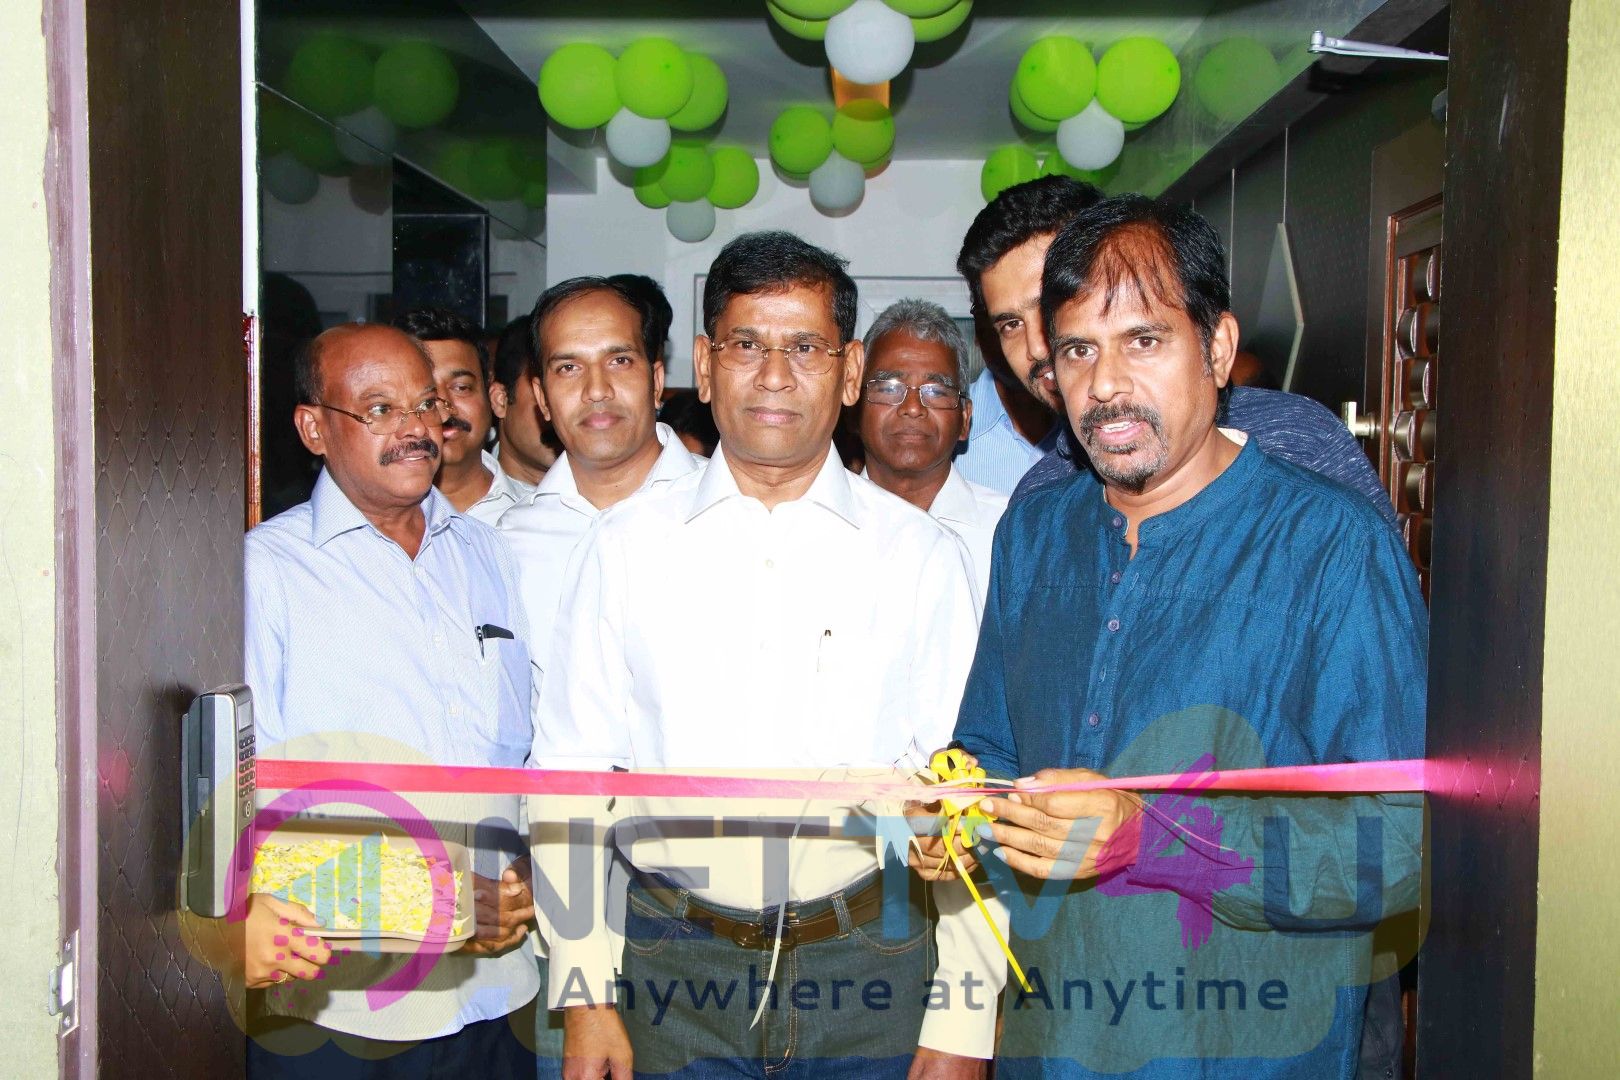   Microplex Studios  Grand  Opening Ceremony Beautiful Images  Tamil Gallery